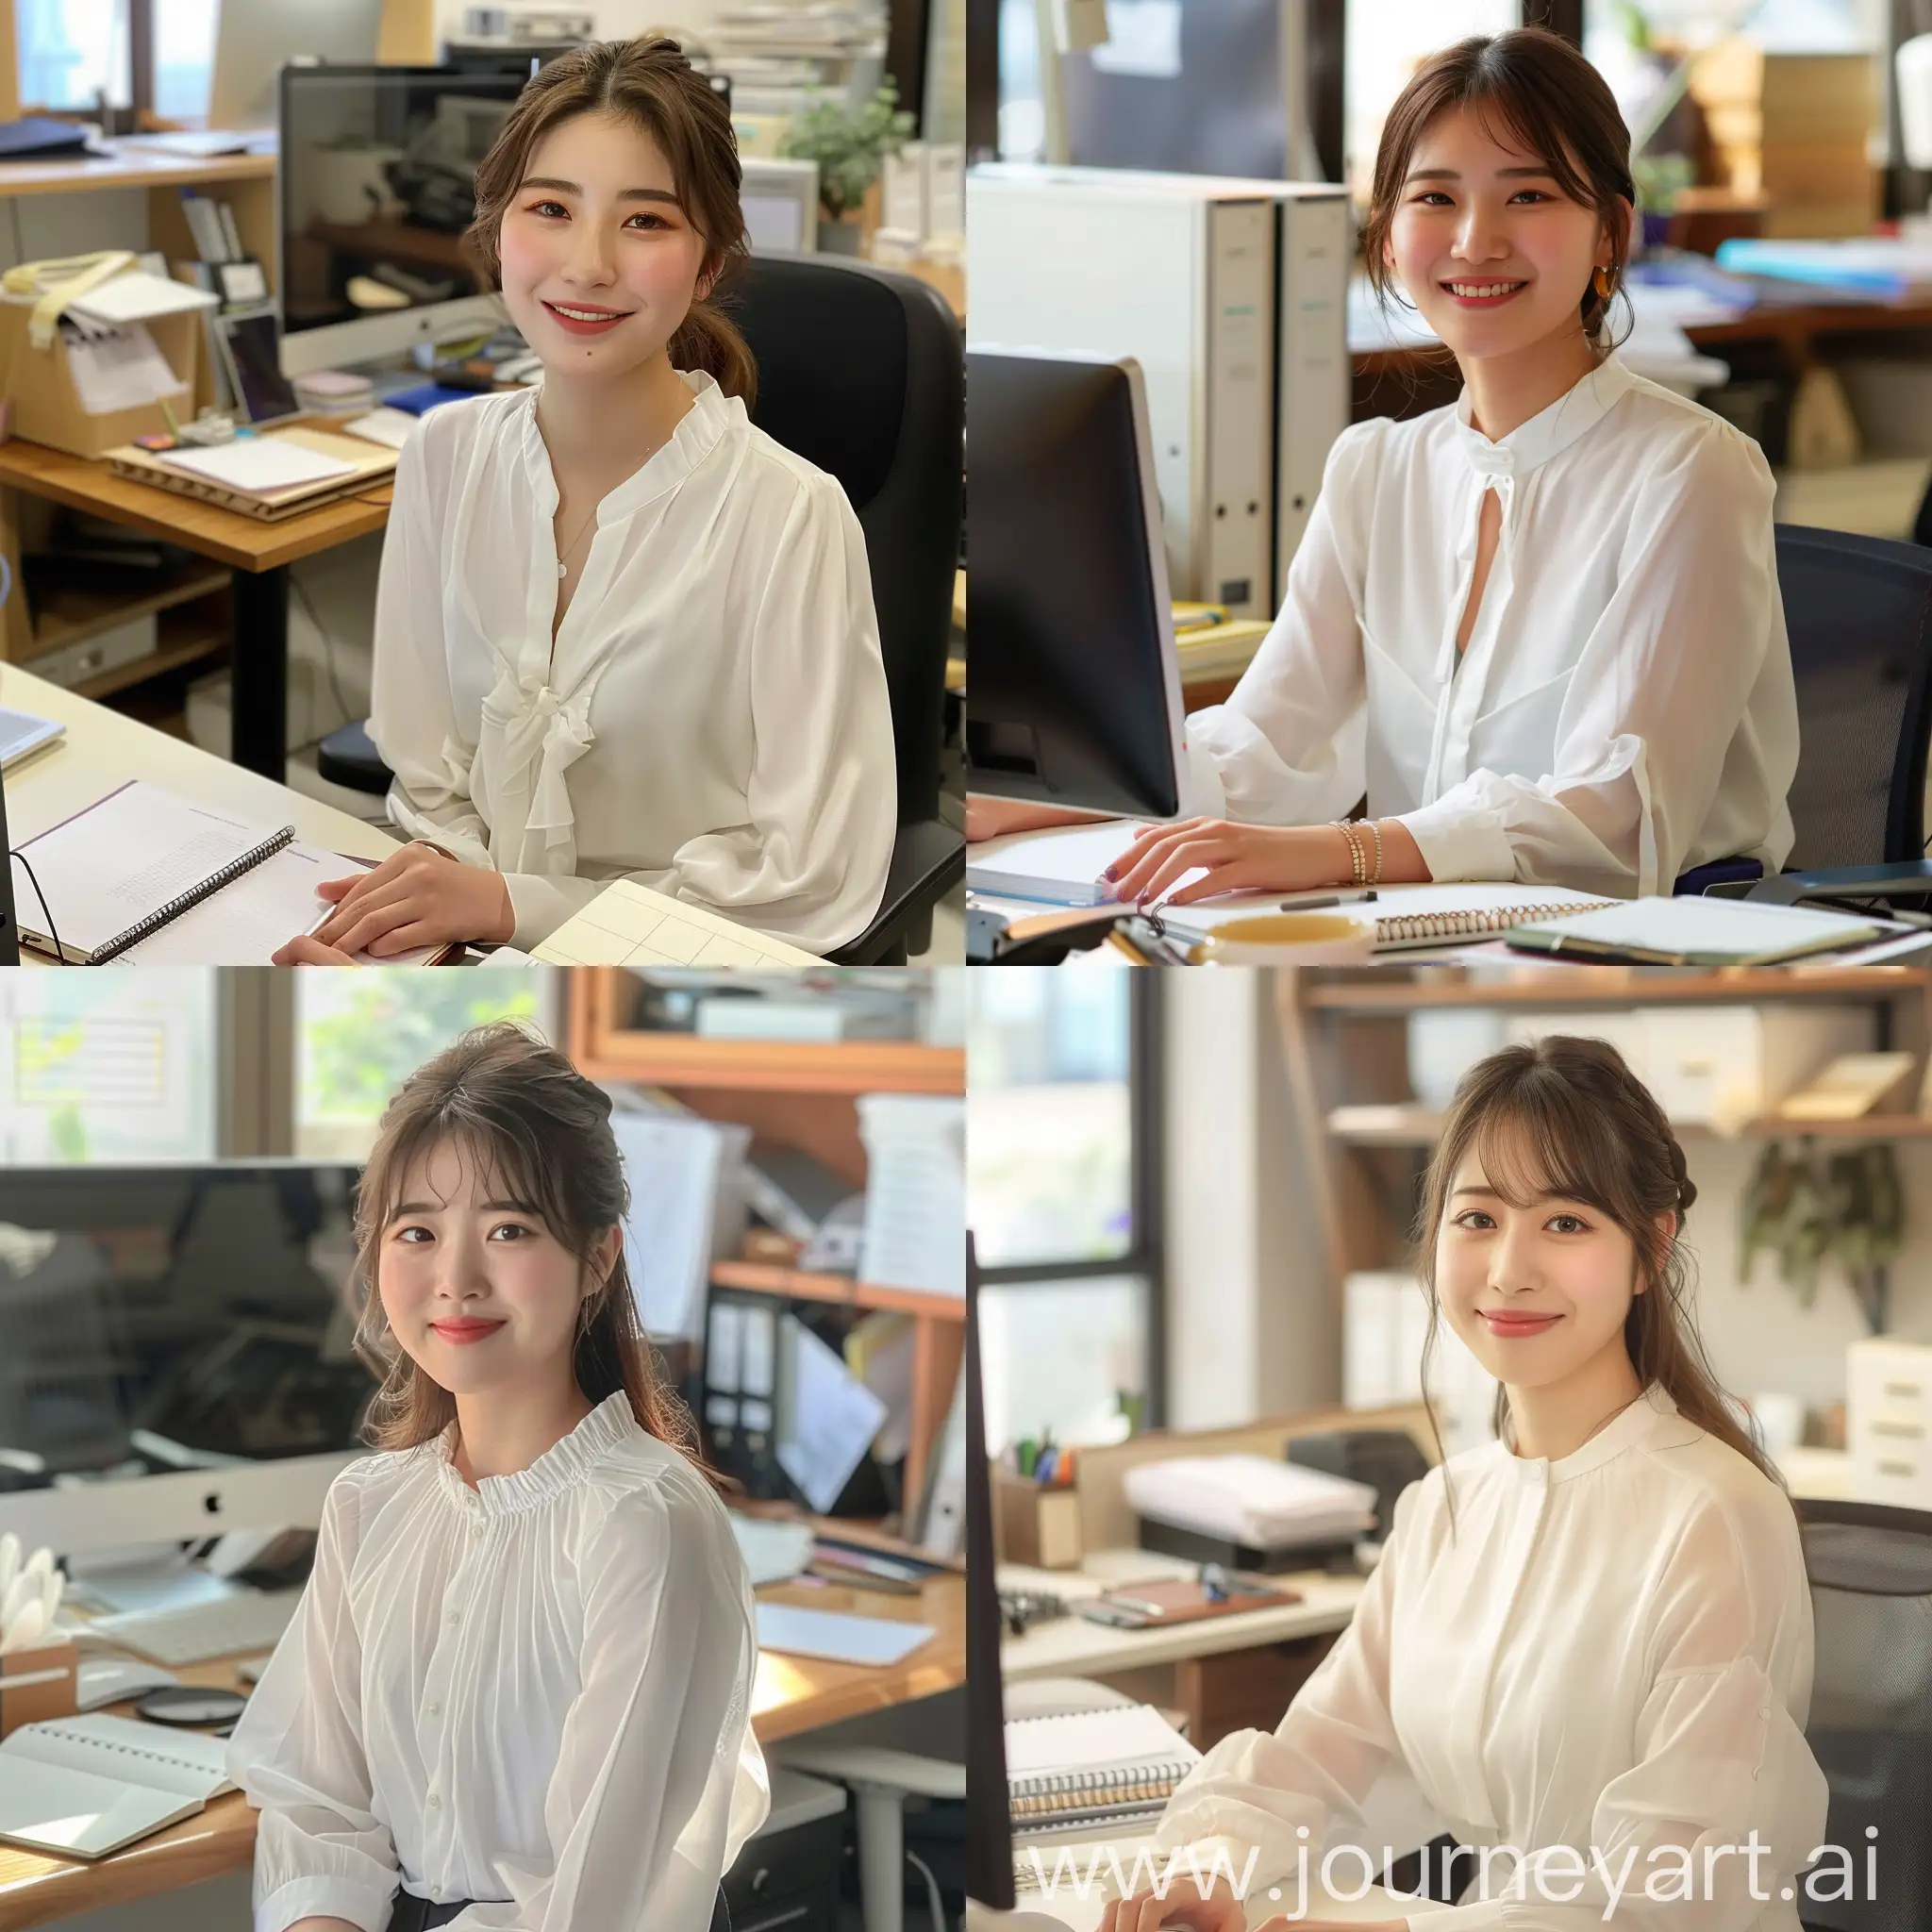 Smiling-Woman-in-White-Blouse-Working-in-Cozy-Office-Ambiance